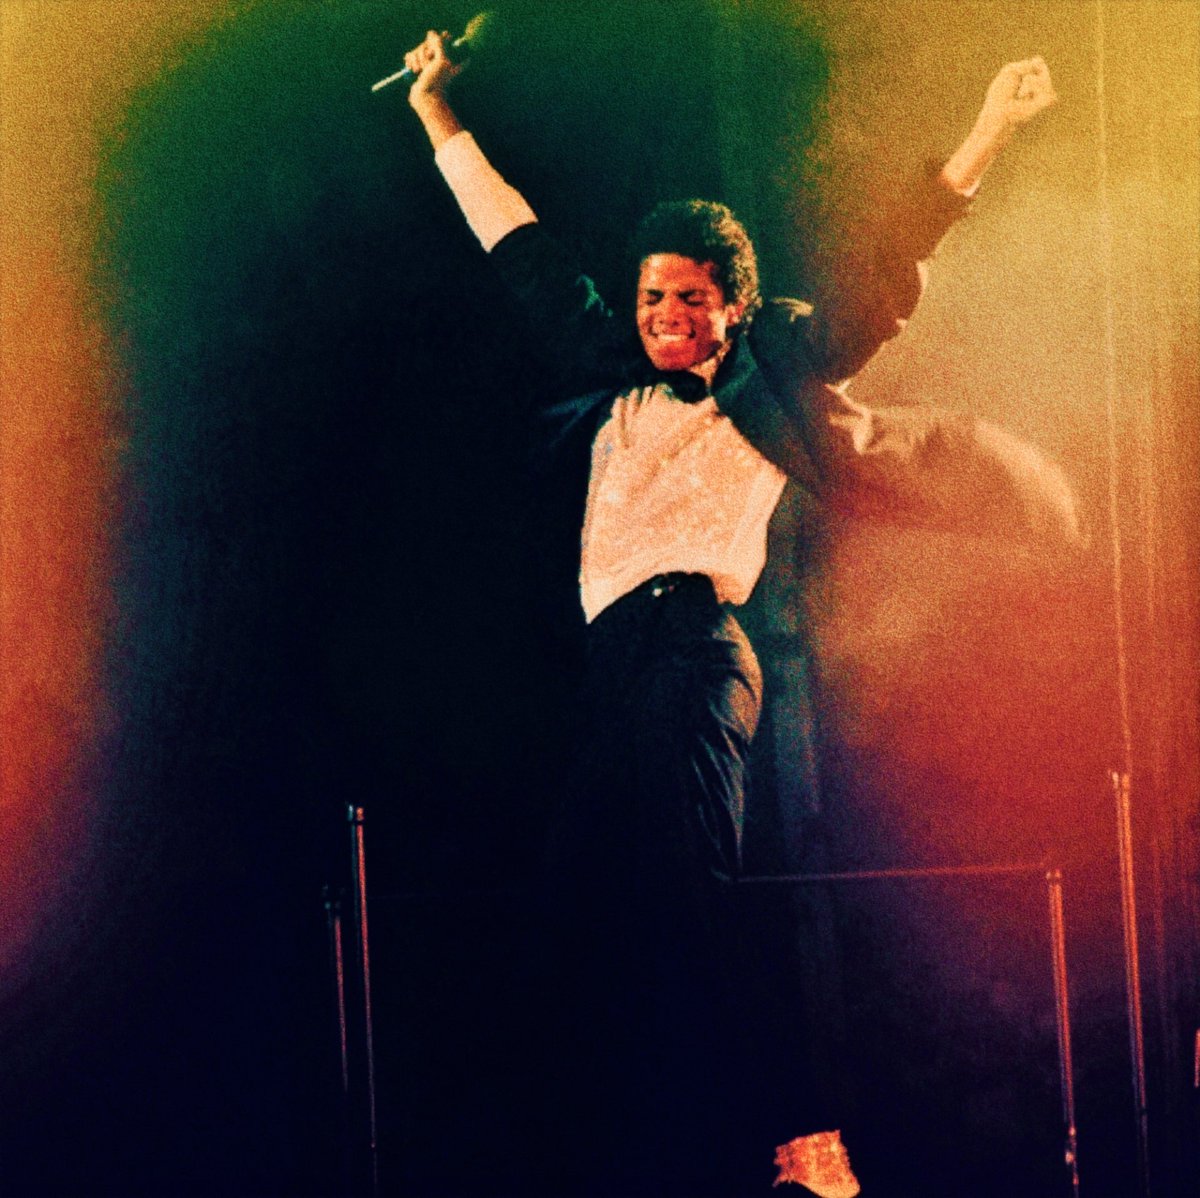 'A star can never die. It just turns into a smile and melts back into the cosmic music, the dance of life.' – Michael Jackson.